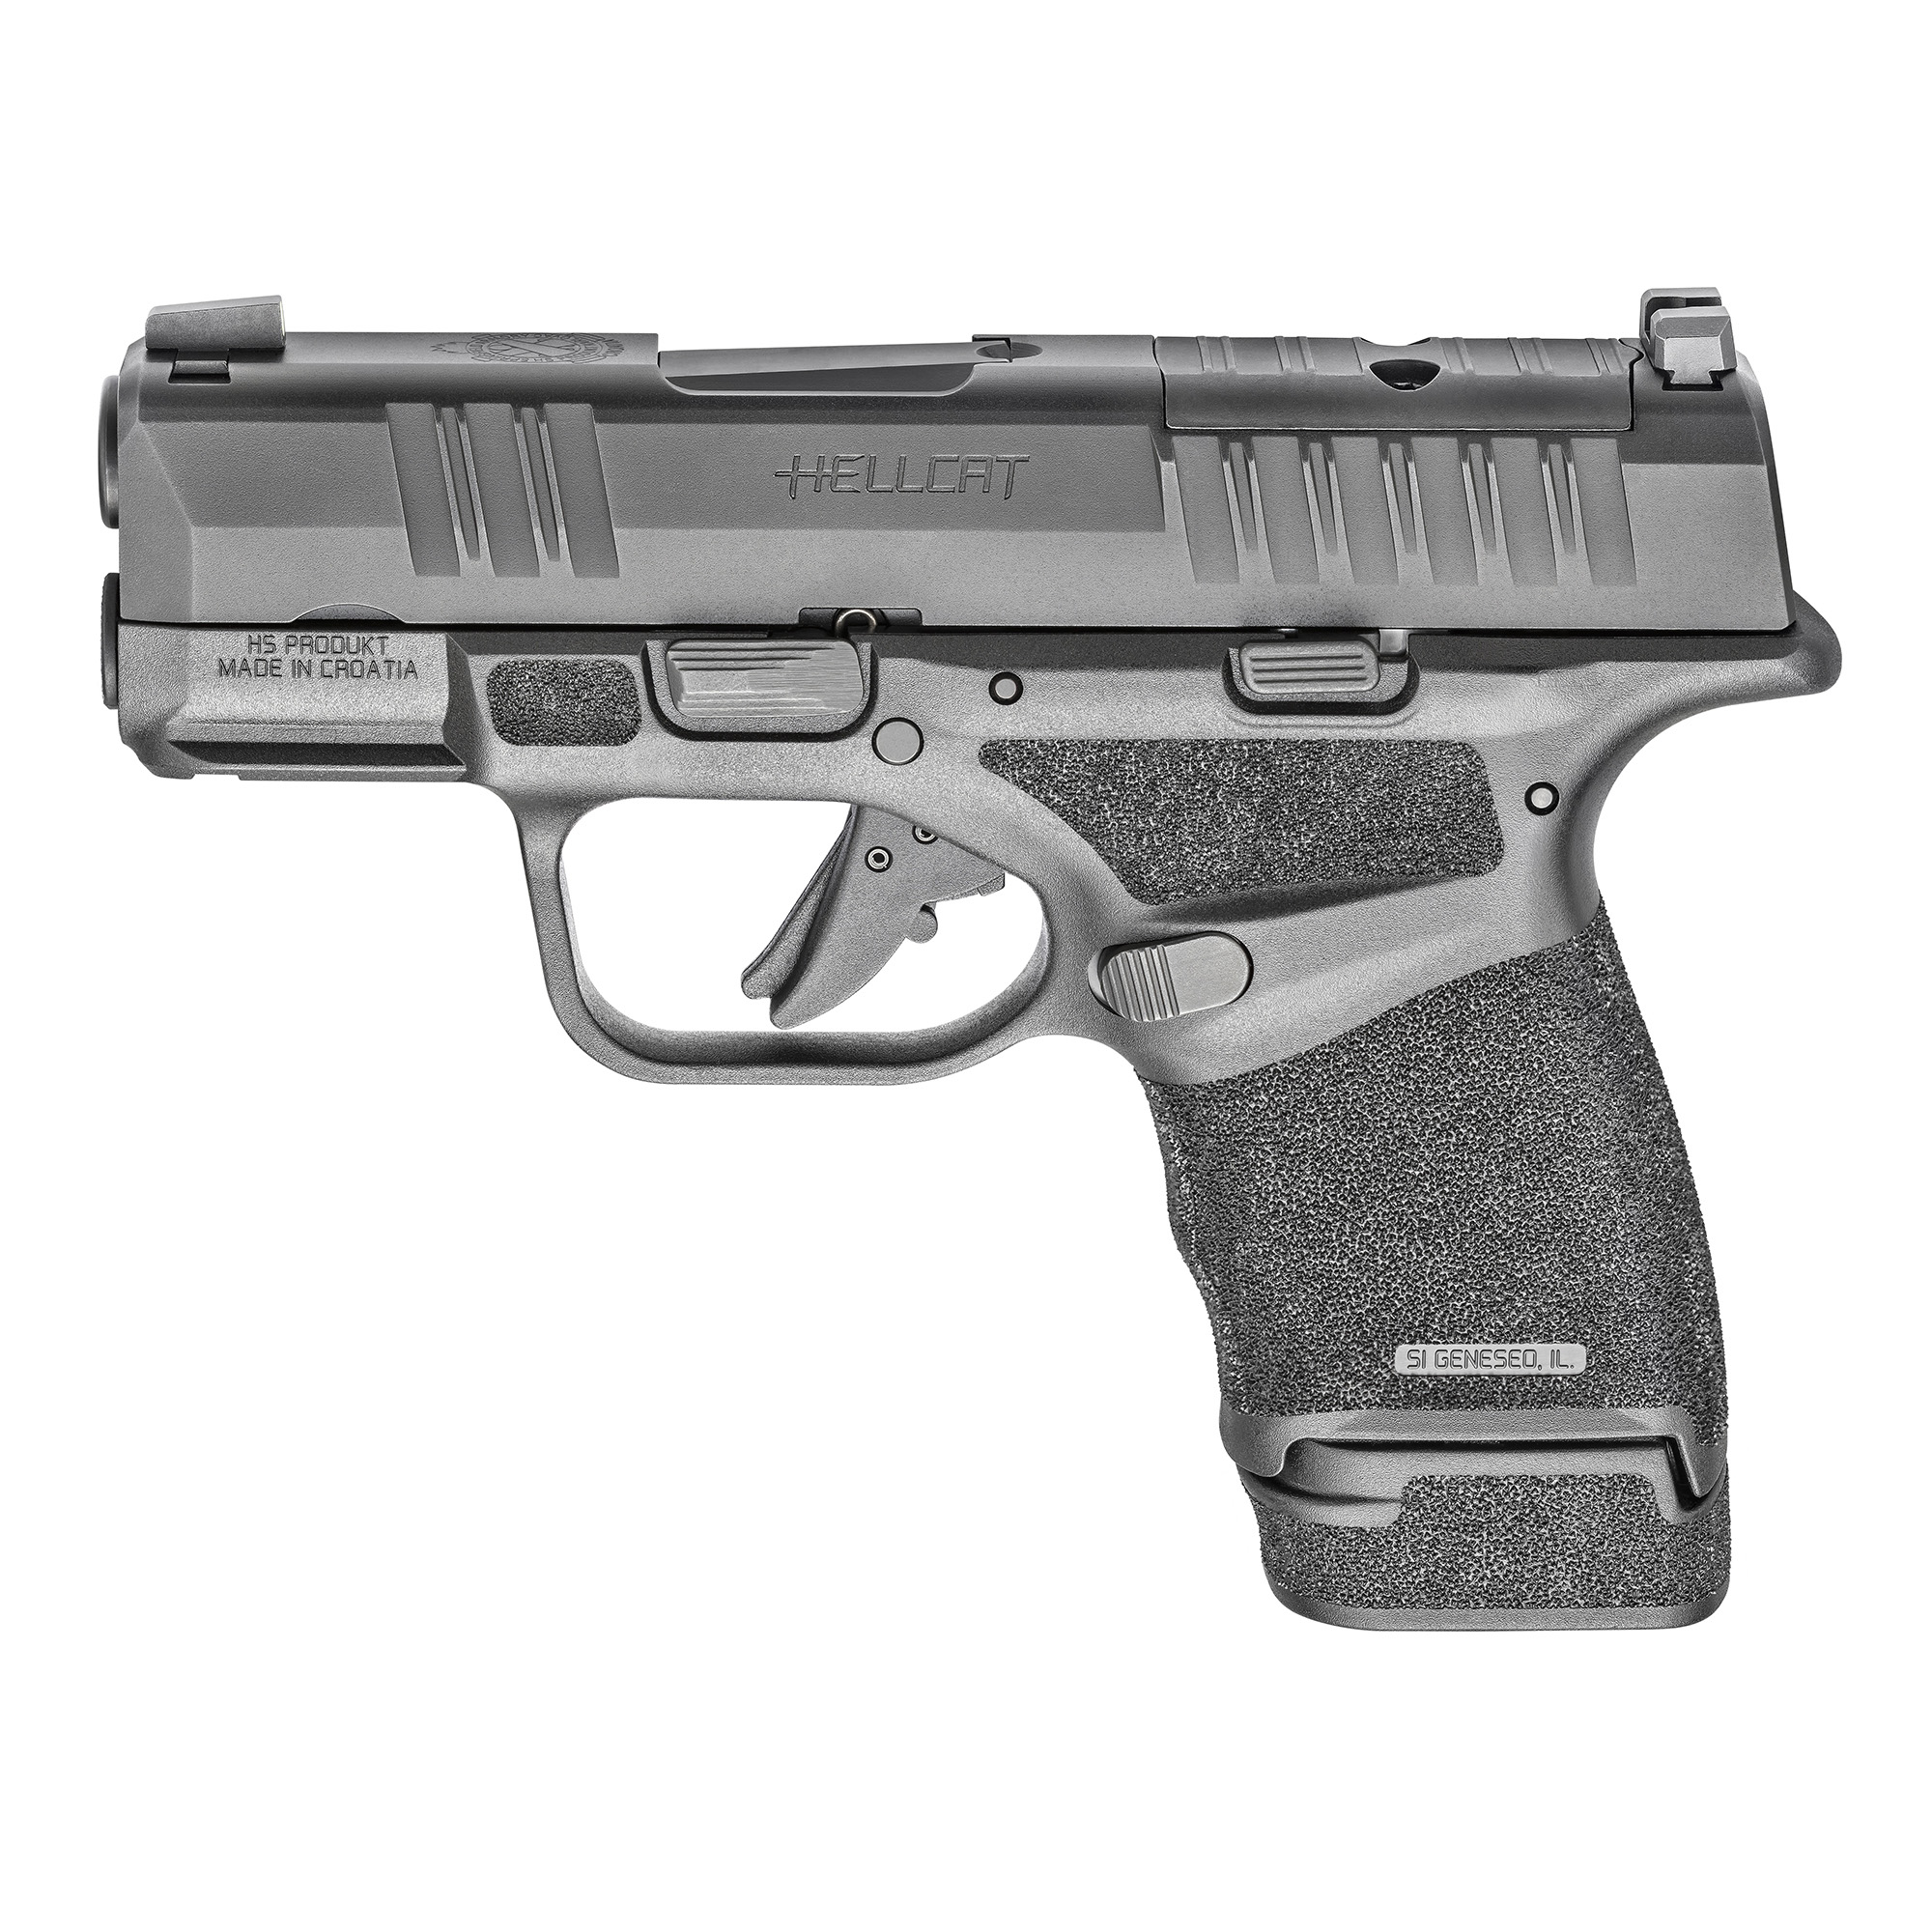 Springfield Armory Hellcat OSP Pistol with Gear Up Package with 5 Magazines - Black